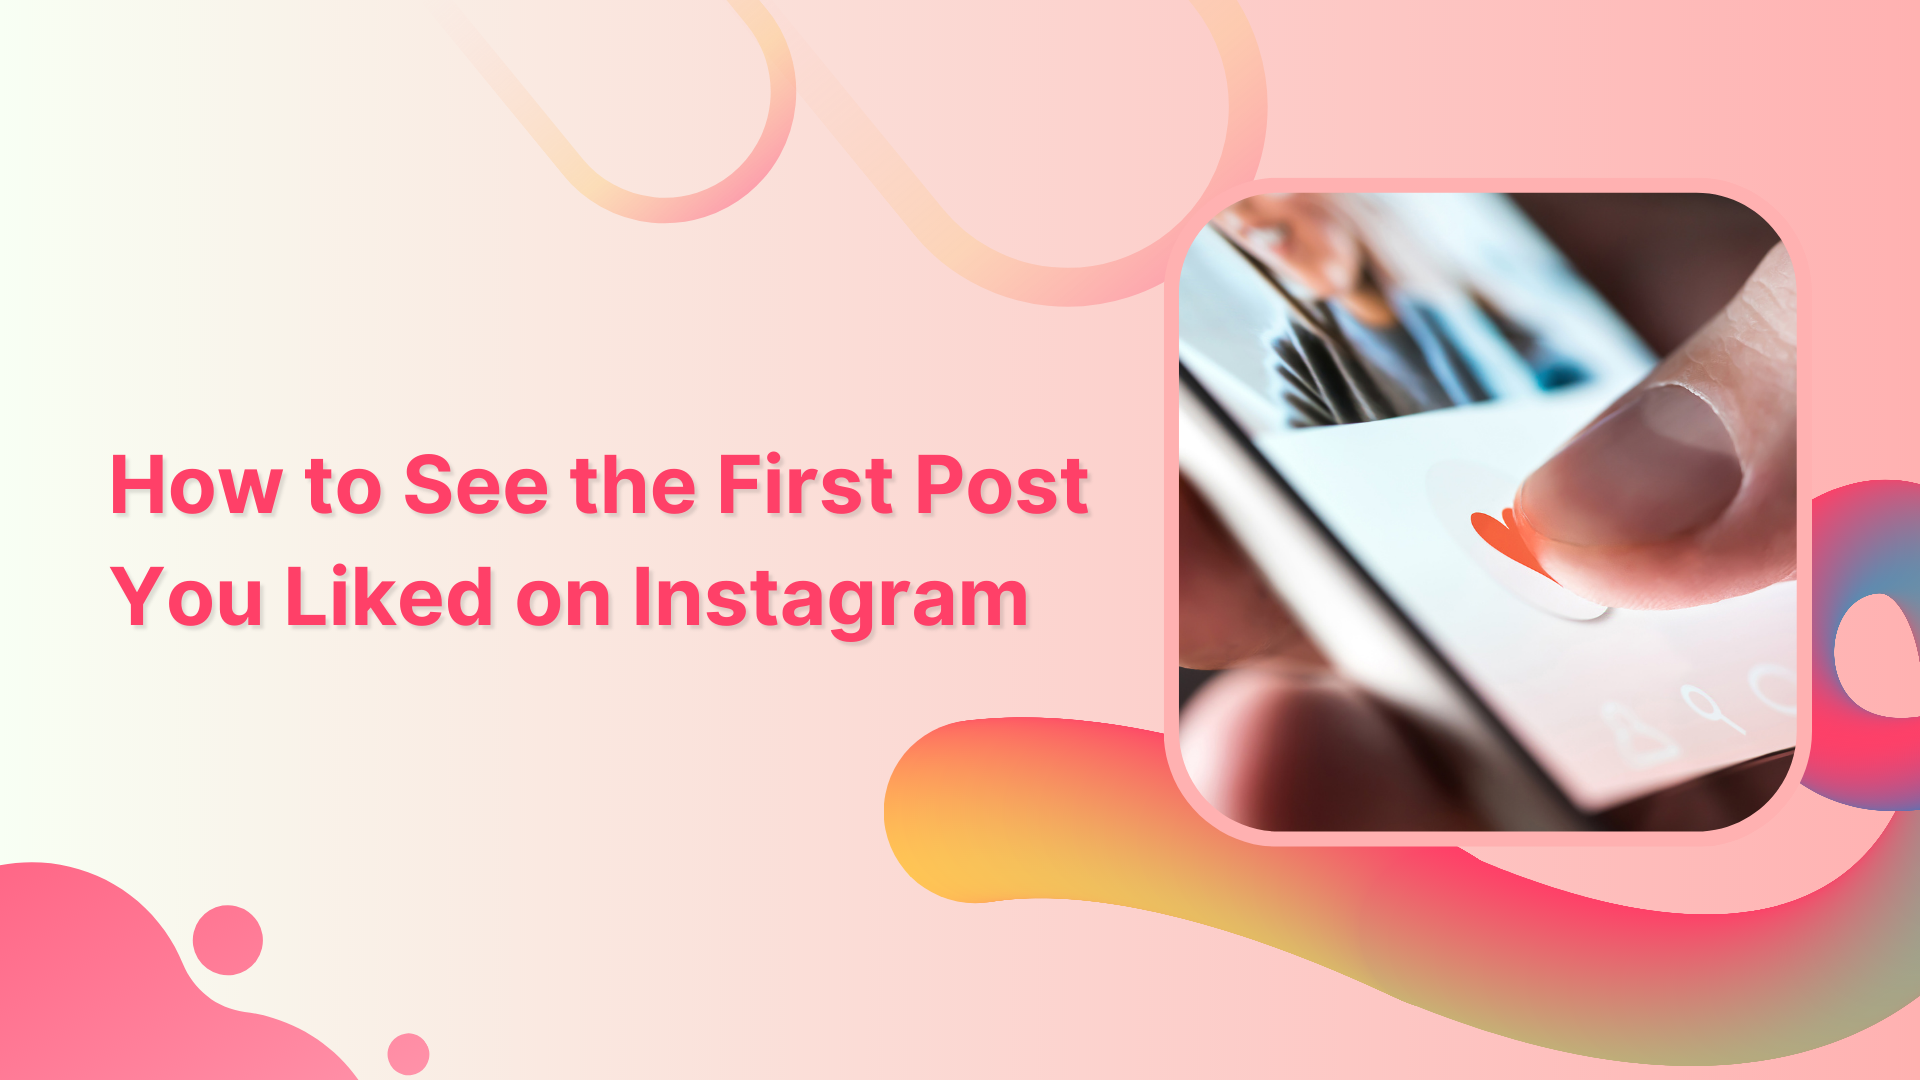 How to See the First Post You Liked on Instagram